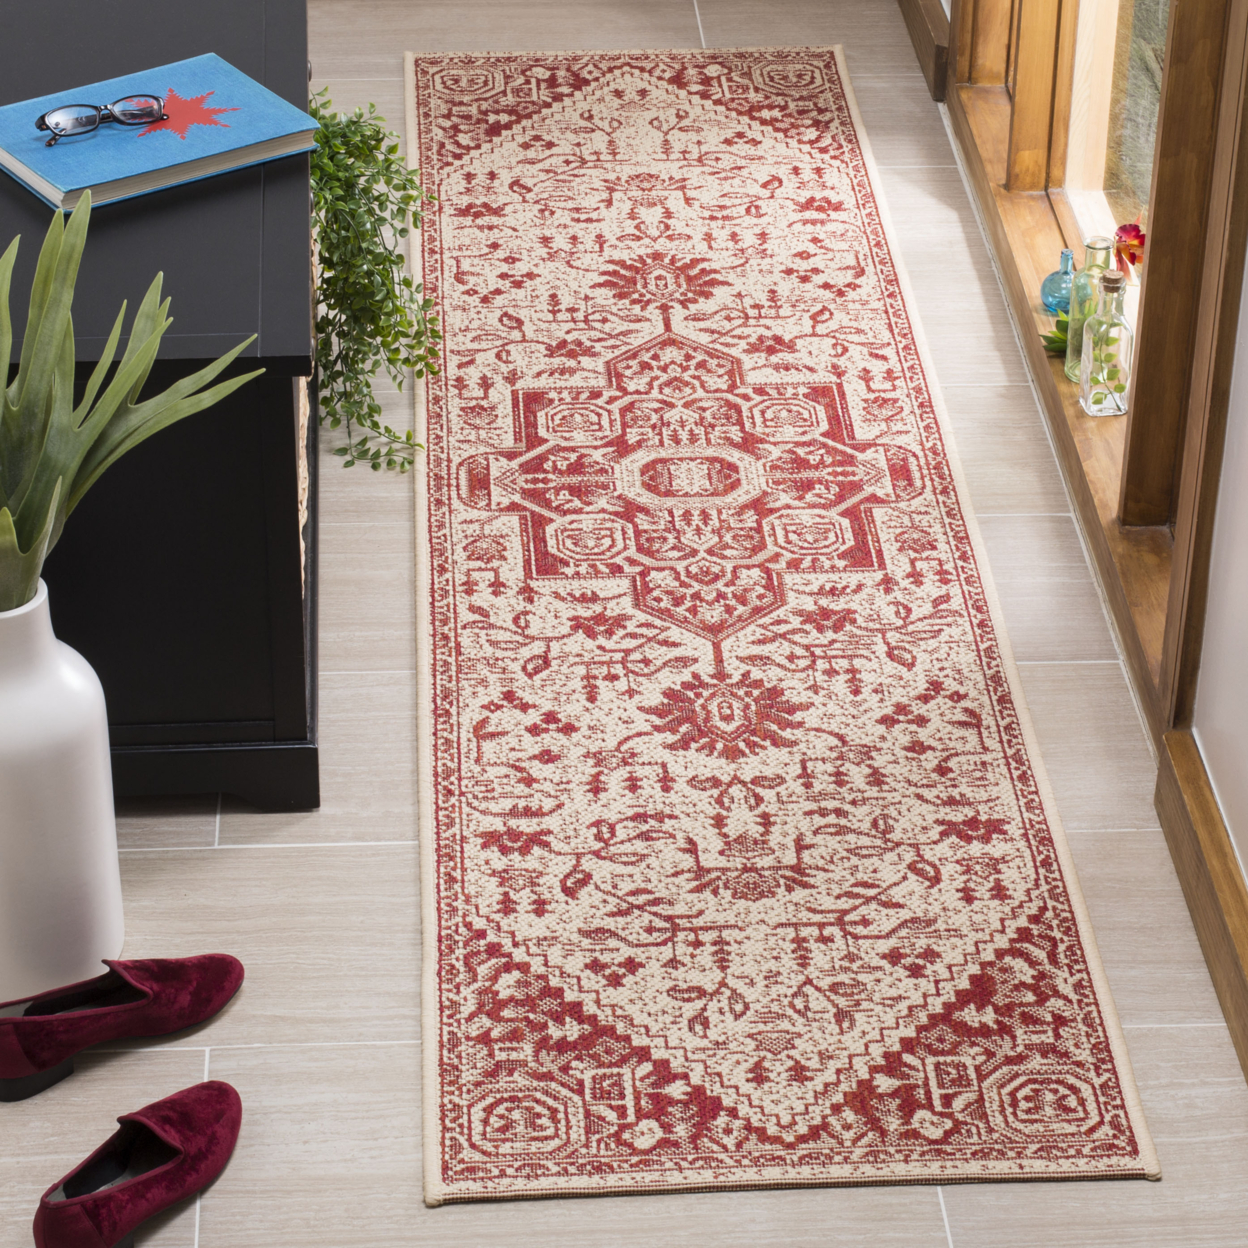 SAFAVIEH Outdoor LND138Q Linden Collection Red / Creme Rug - image 3 of 10